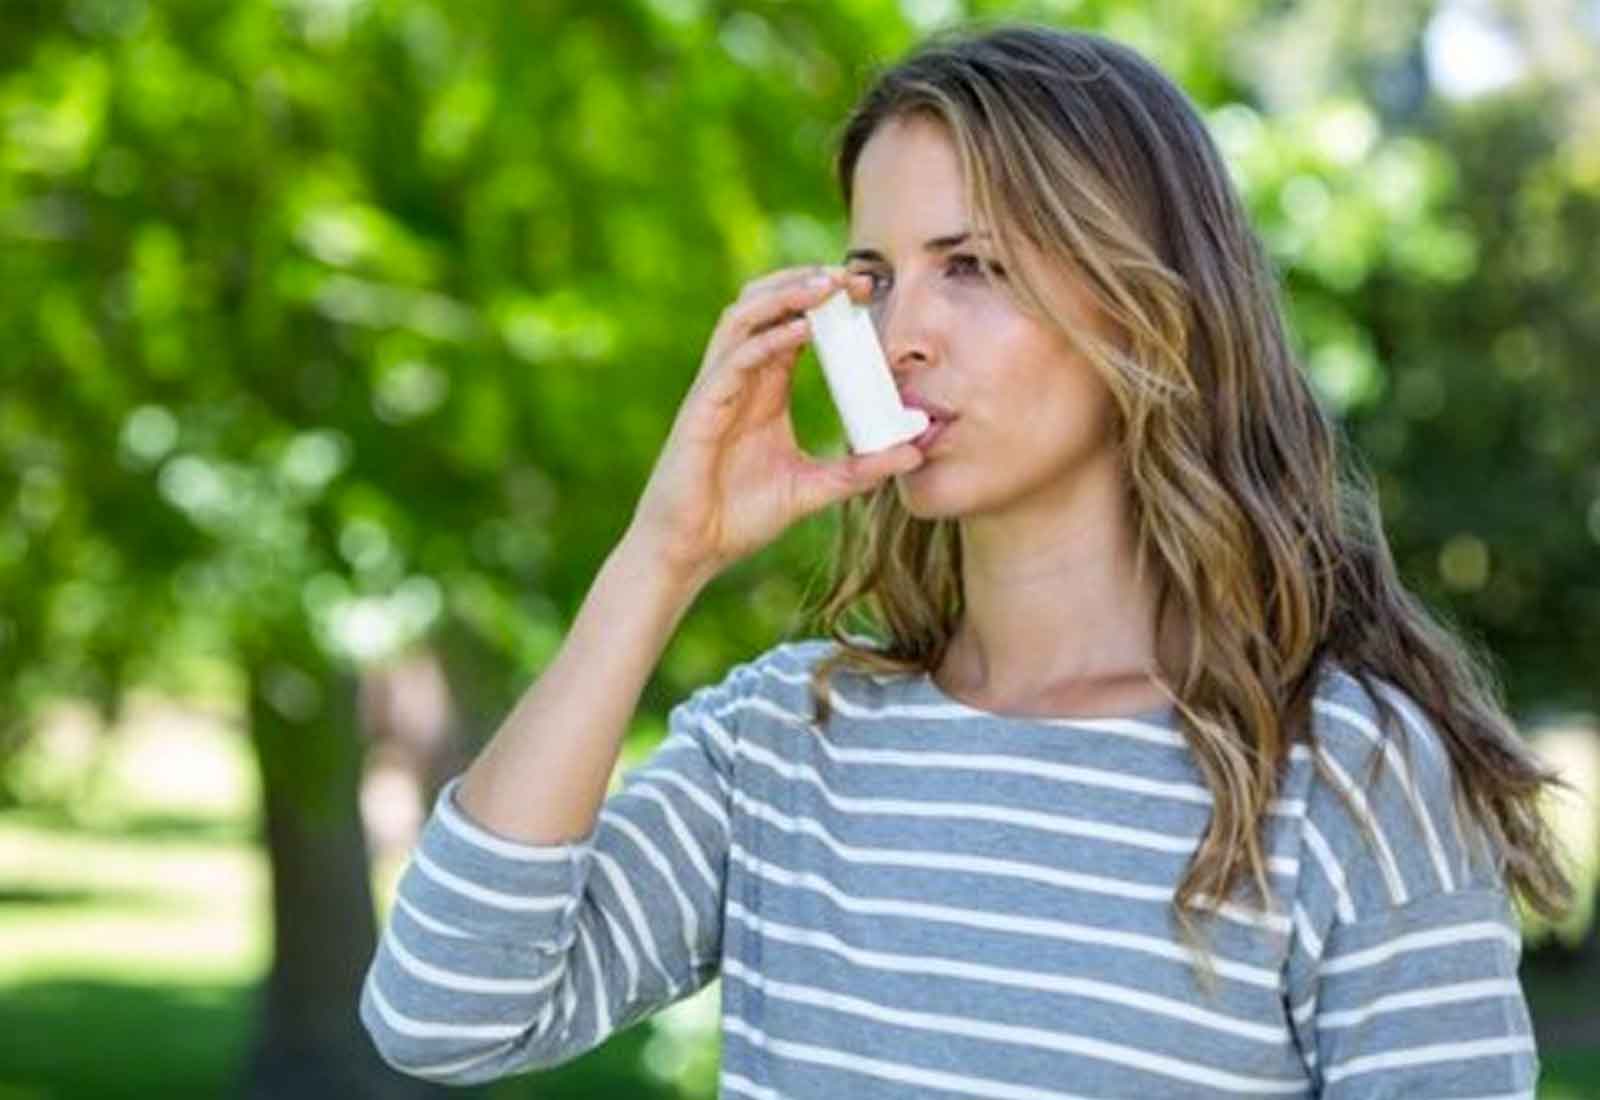 Combo inhaler protects mild asthmatics from attacks: Study